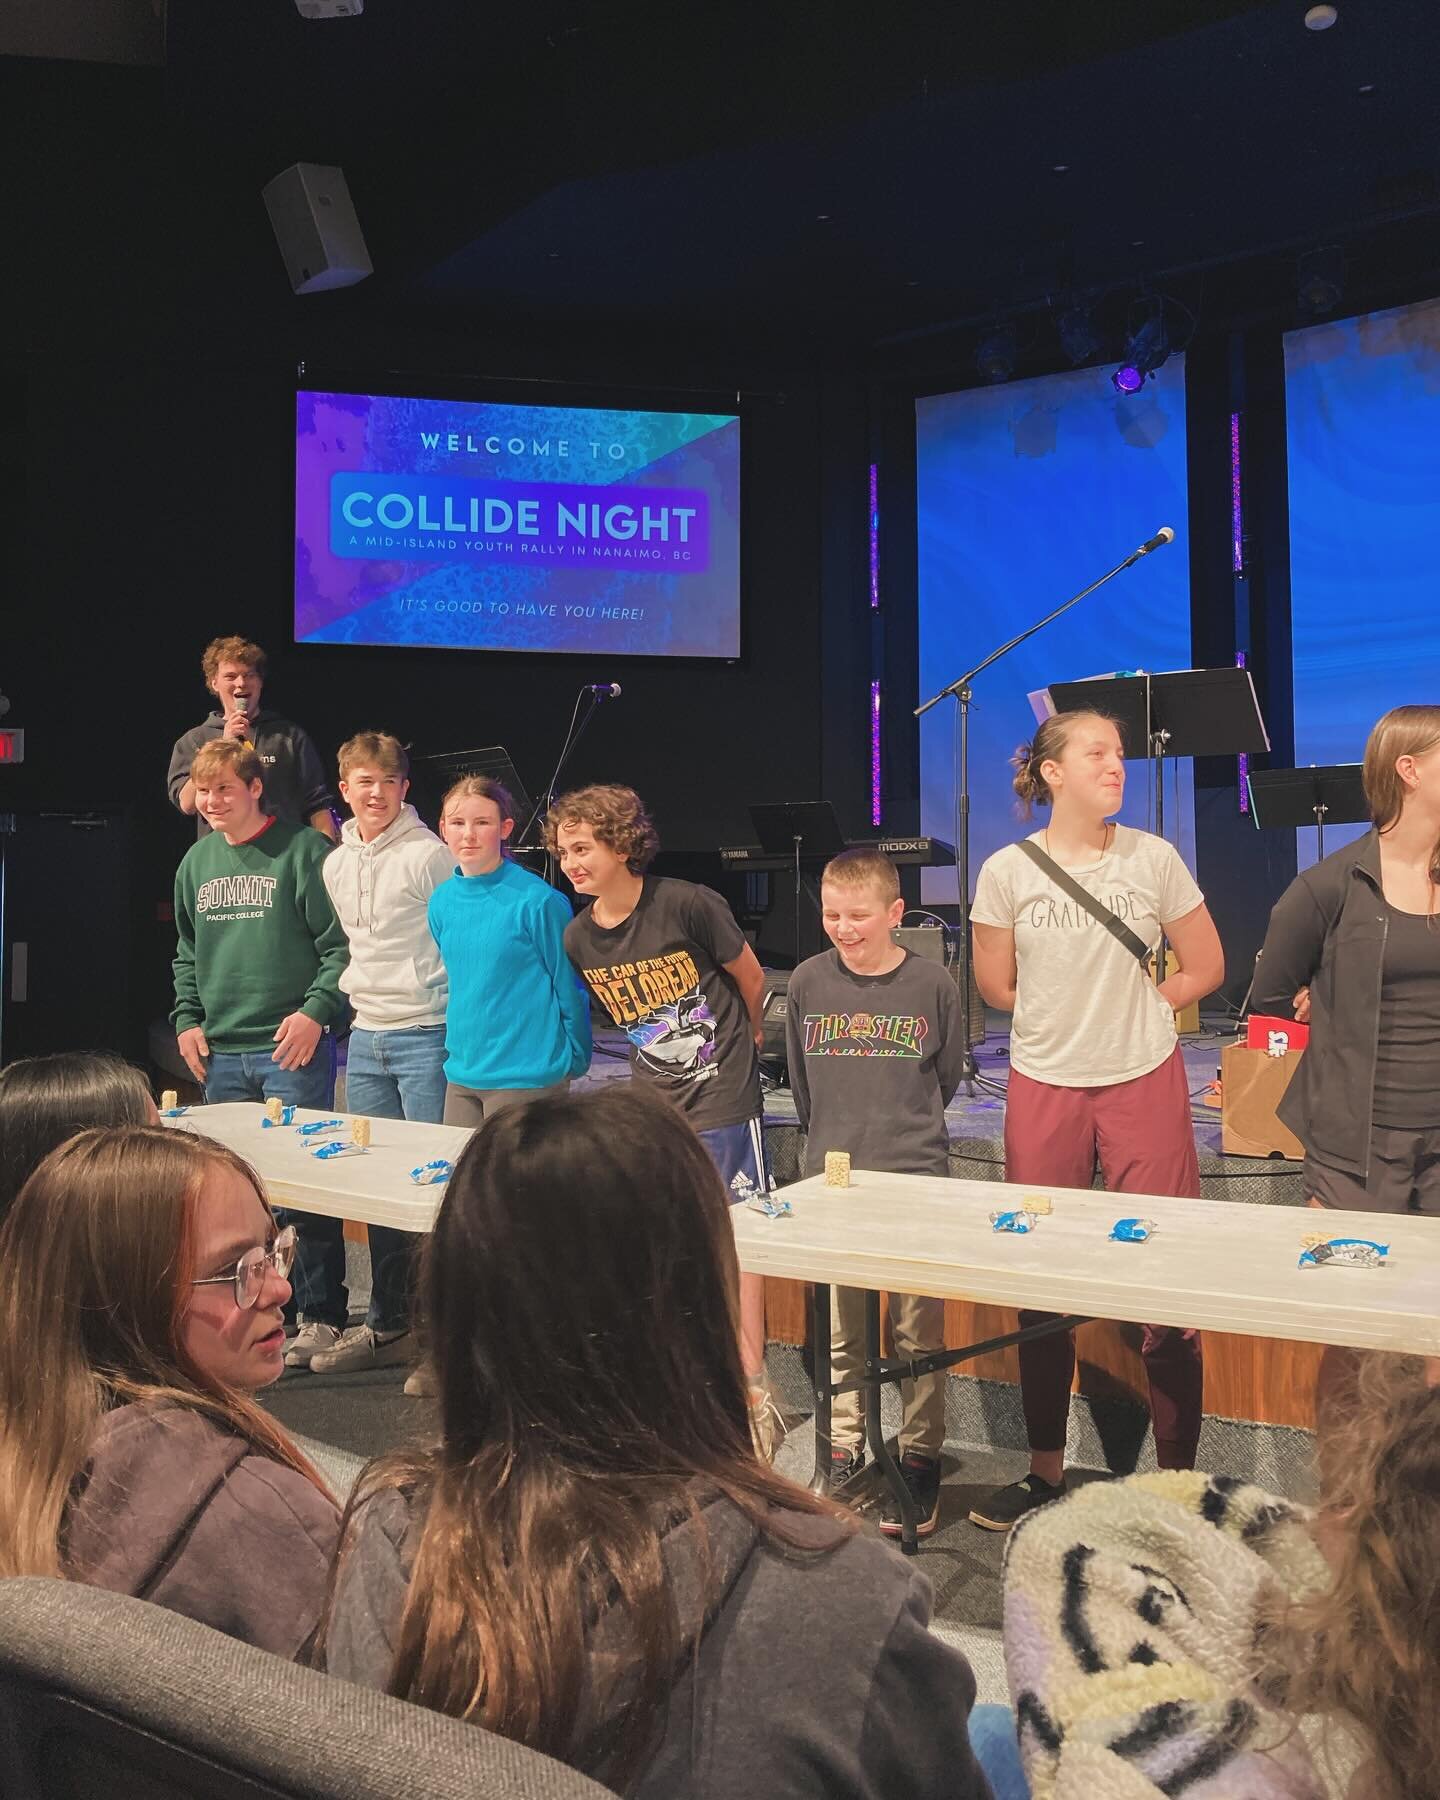 Awesome night at Collide yesterday night. Lots of crazy fun, worship, and connecting with other youth groups on the Mid Island. Shout out to @generationsyouthycd for hosting Collide!!!